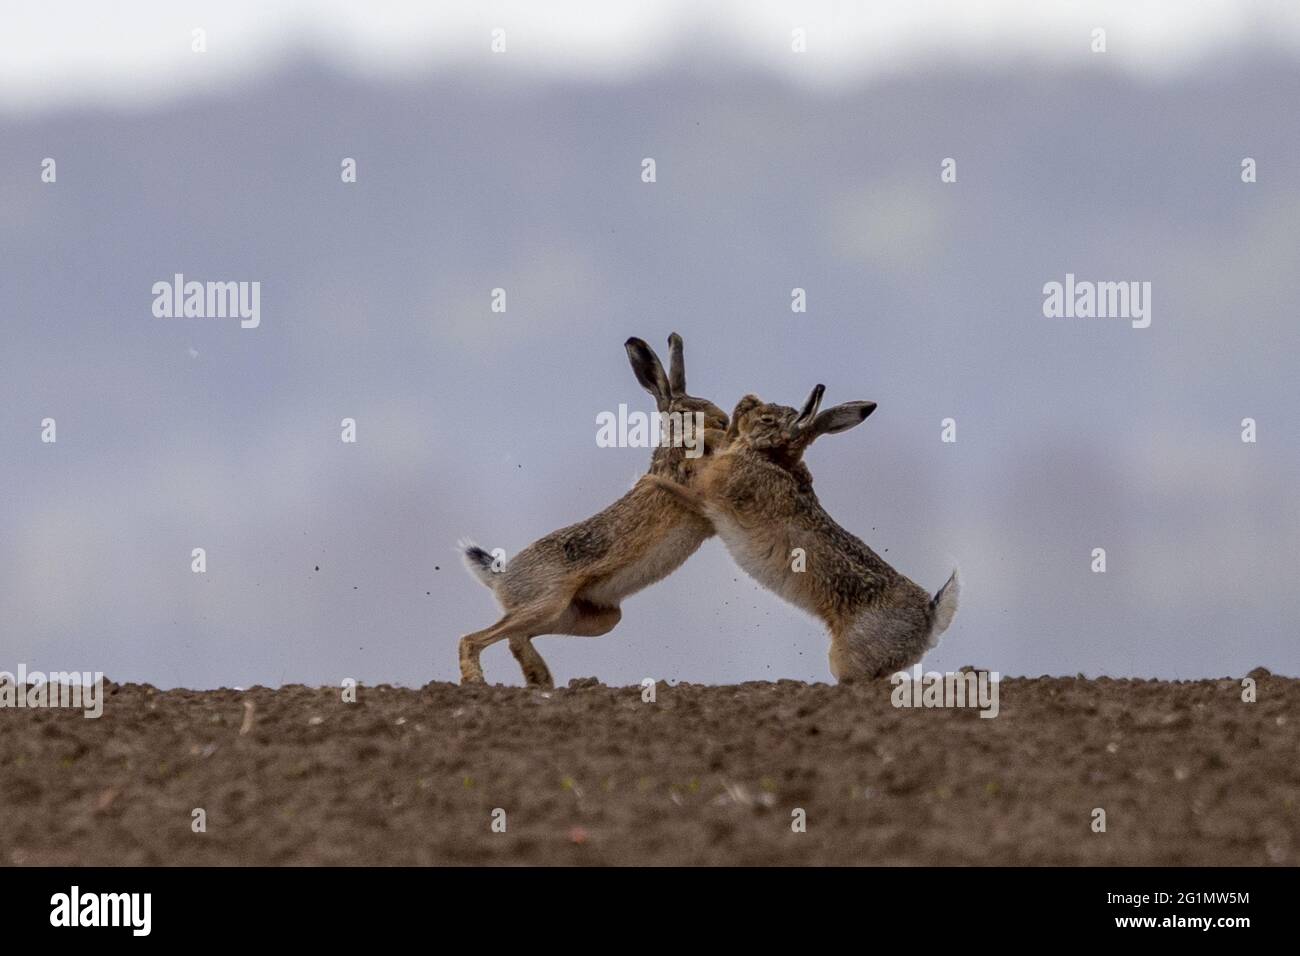 France, Oise, Senlis region, arable land, European hare (Lepus europaeus), at the time of reproduction, male and female boxing in the fields Stock Photo